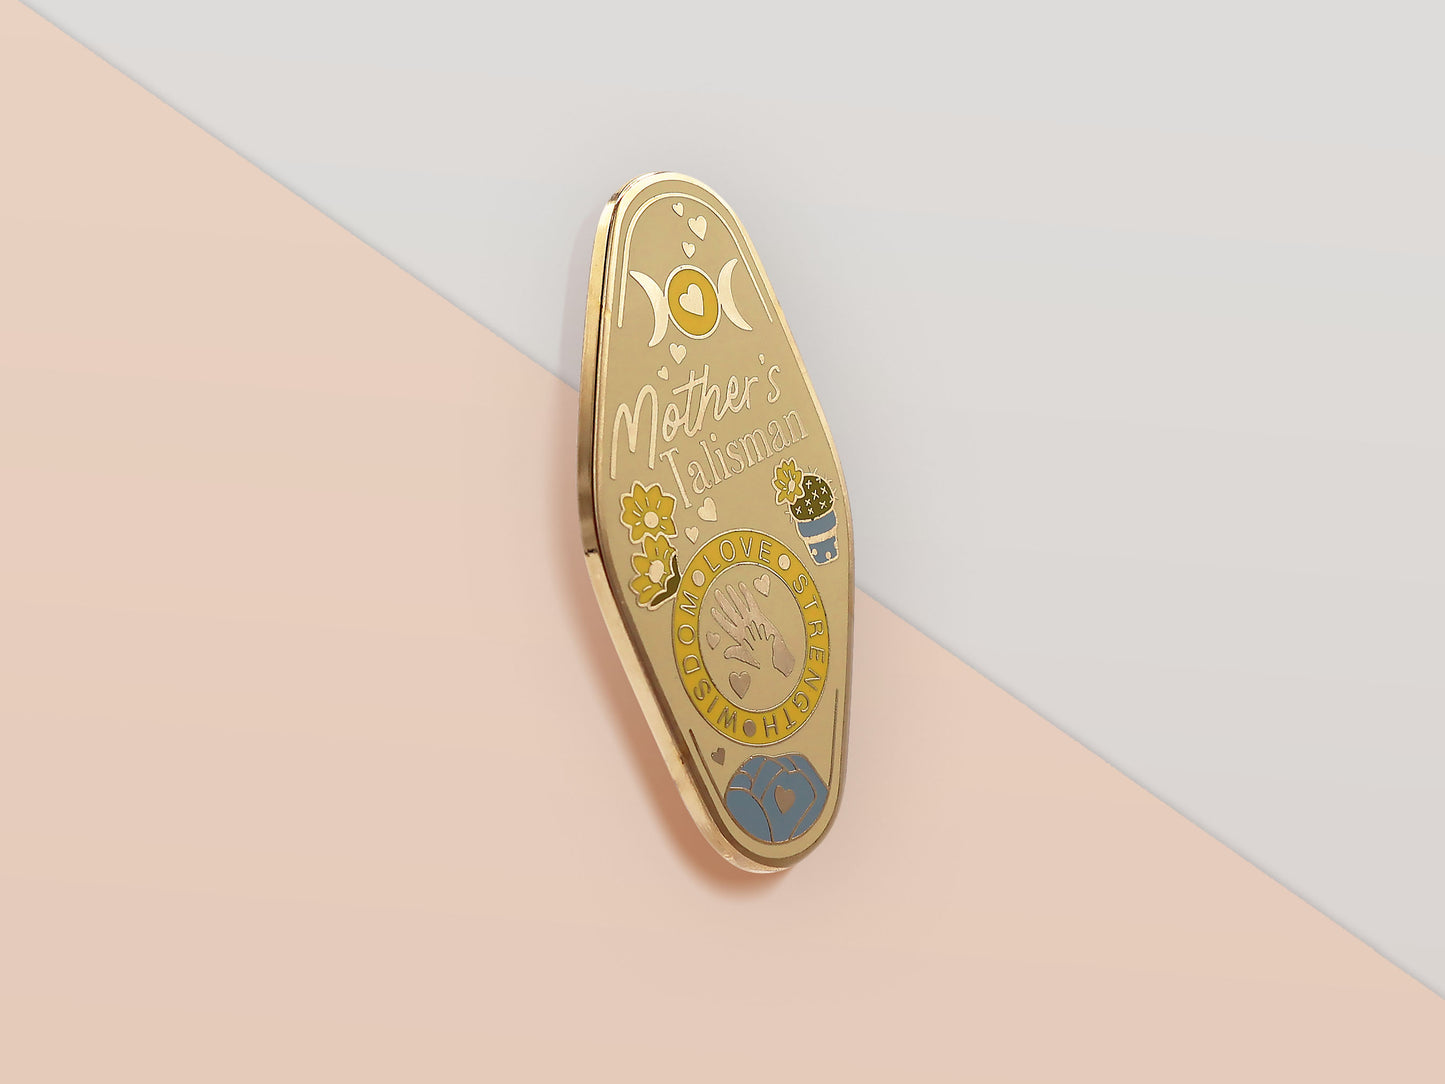 Gold Enamel Talisman Pin with yellow design and the words Mother's Talisman, Wisdom Love Strength. The pins design includes a a mother and child's hand, the three mothers moons, as well as flowers and crystals.